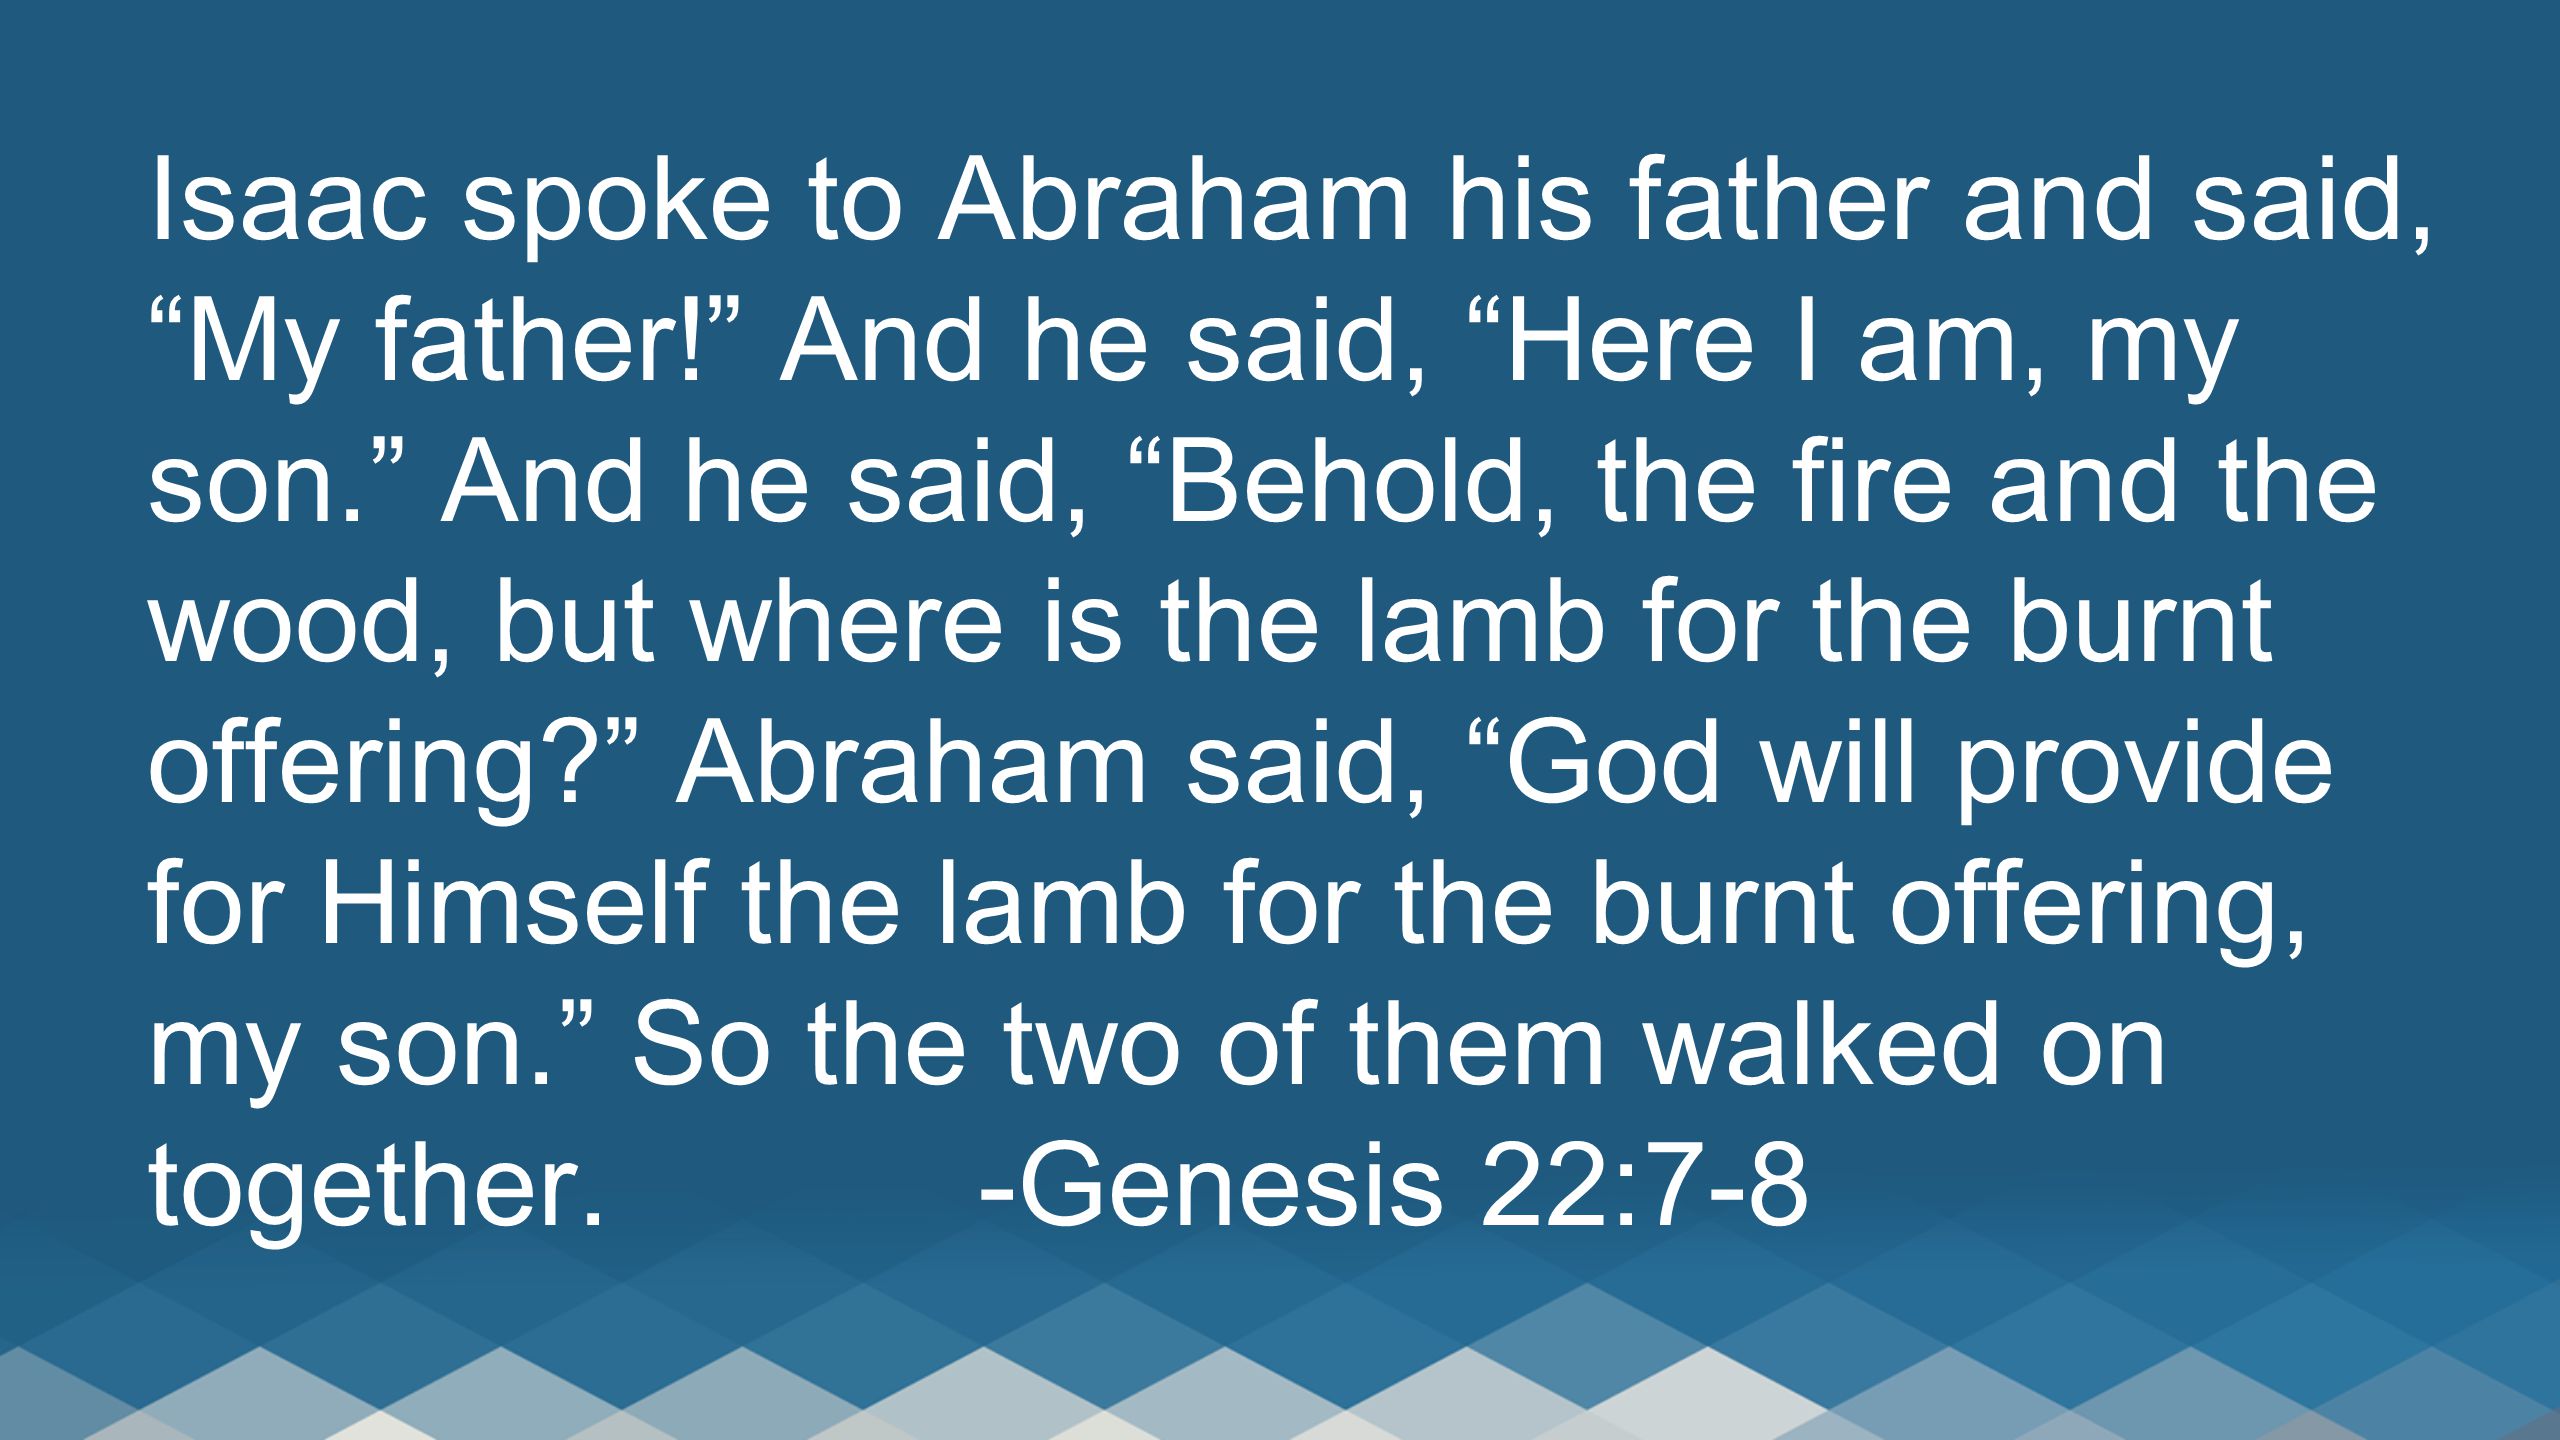 Isaac spoke to Abraham his father and said, My father! And he said, Here I am, my son. And he said, Behold, the fire and the wood, but where is the lamb for the burnt offering Abraham said, God will provide for Himself the lamb for the burnt offering, my son. So the two of them walked on together.-Genesis 22:7-8